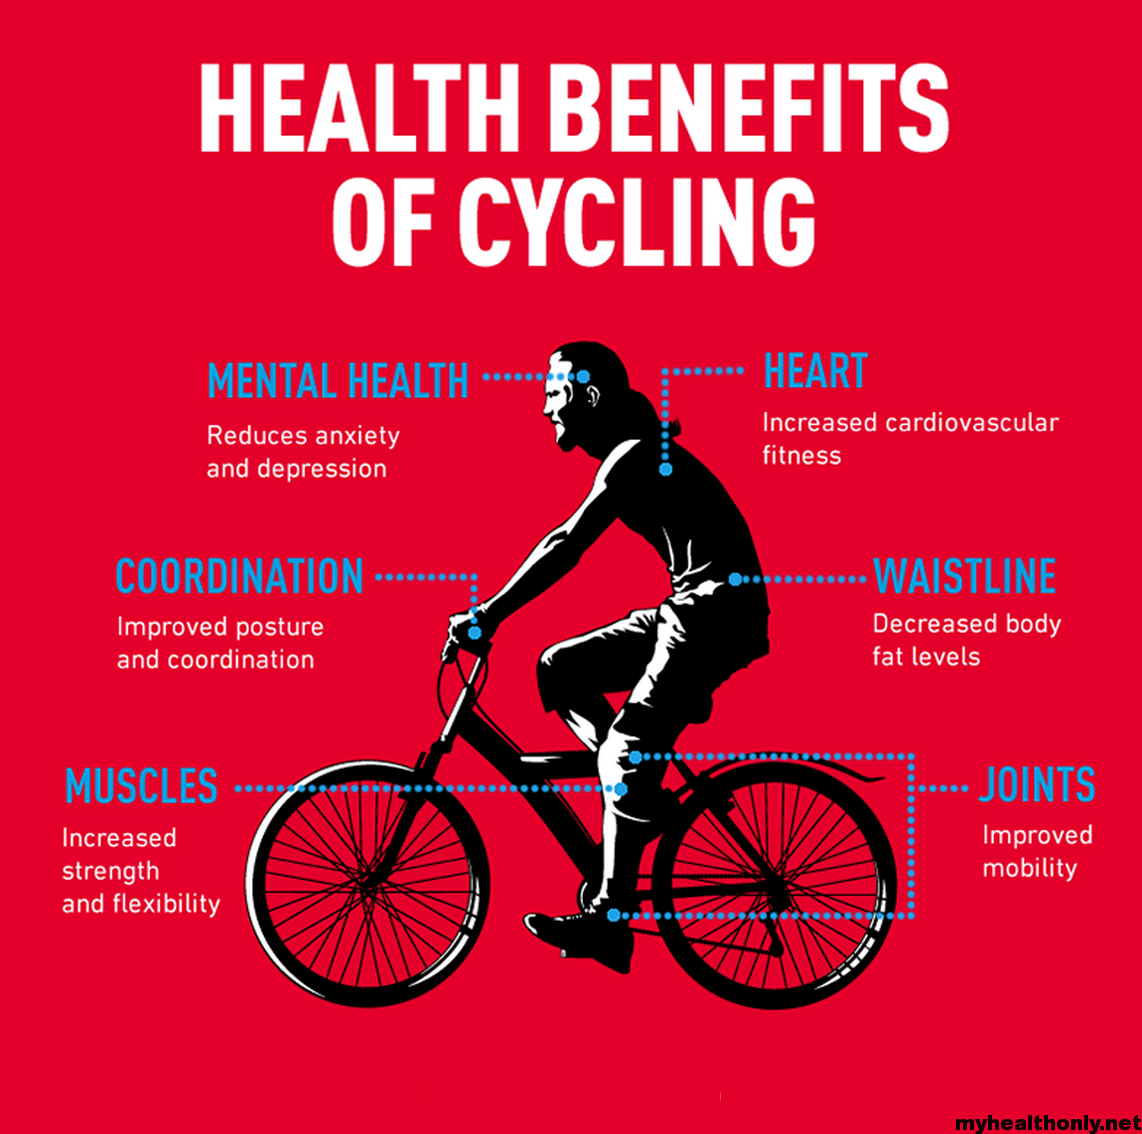 research that cycling can help